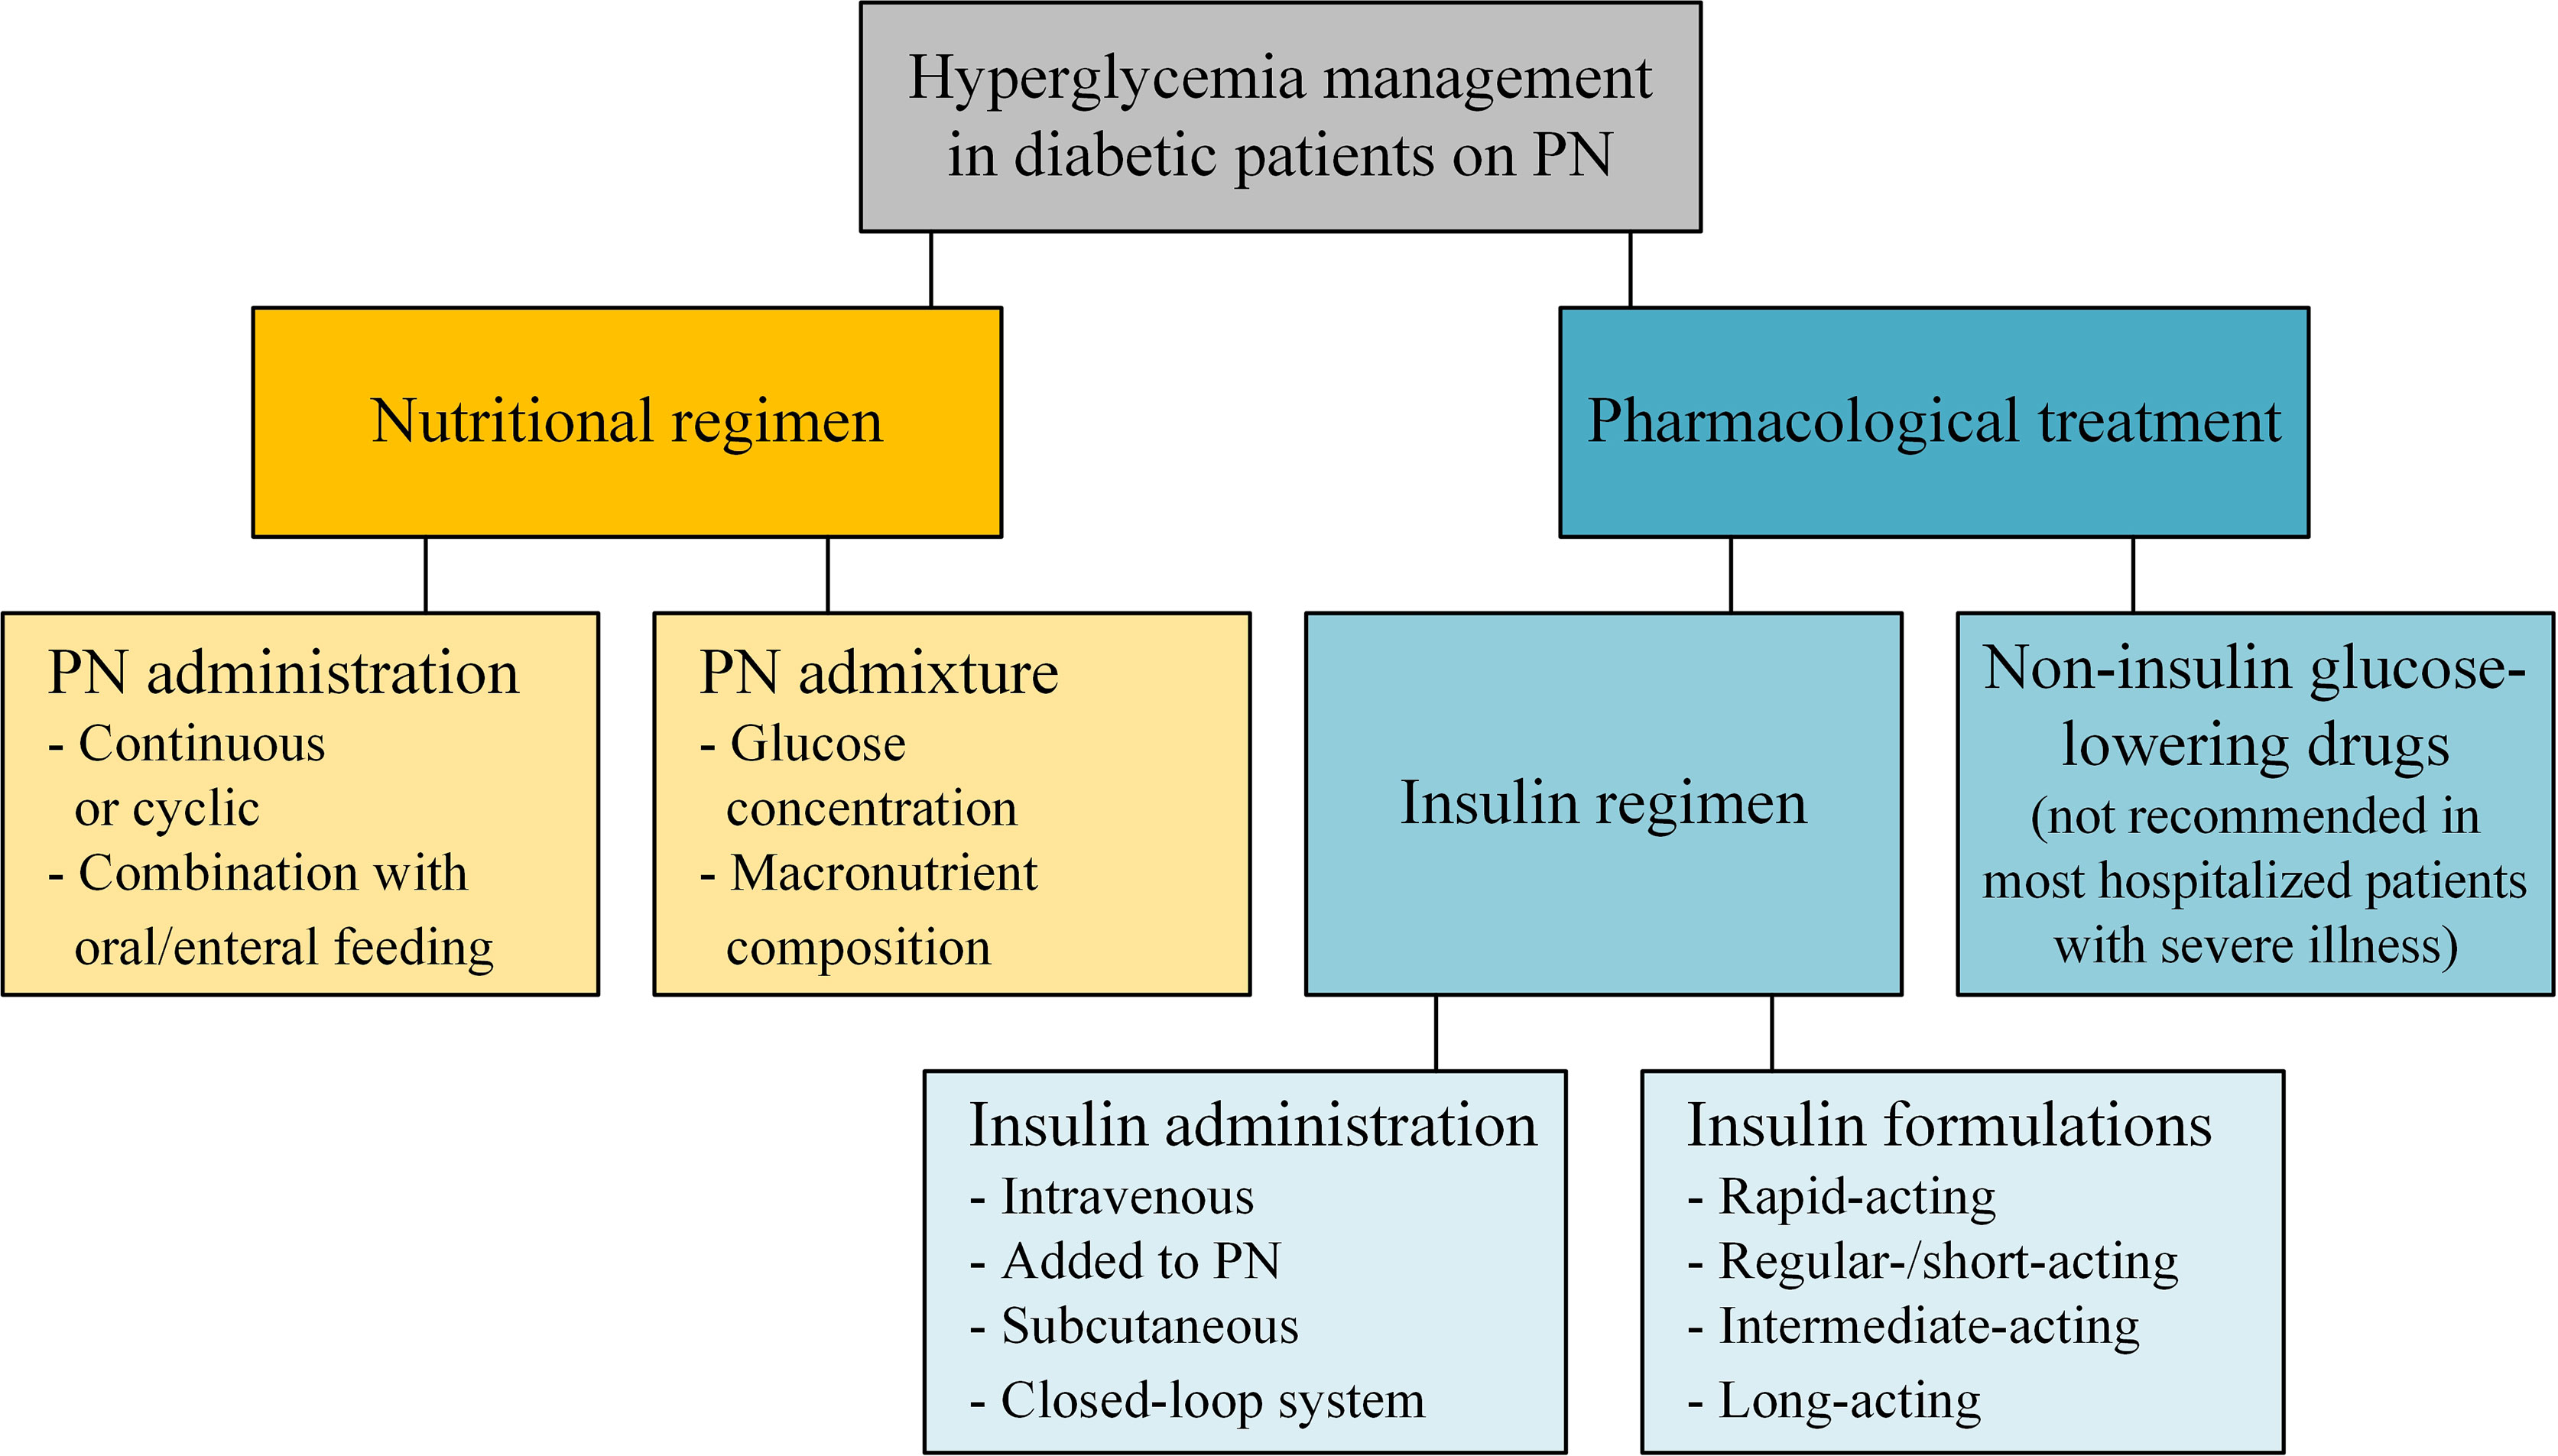 Insulin co-administration with other medications